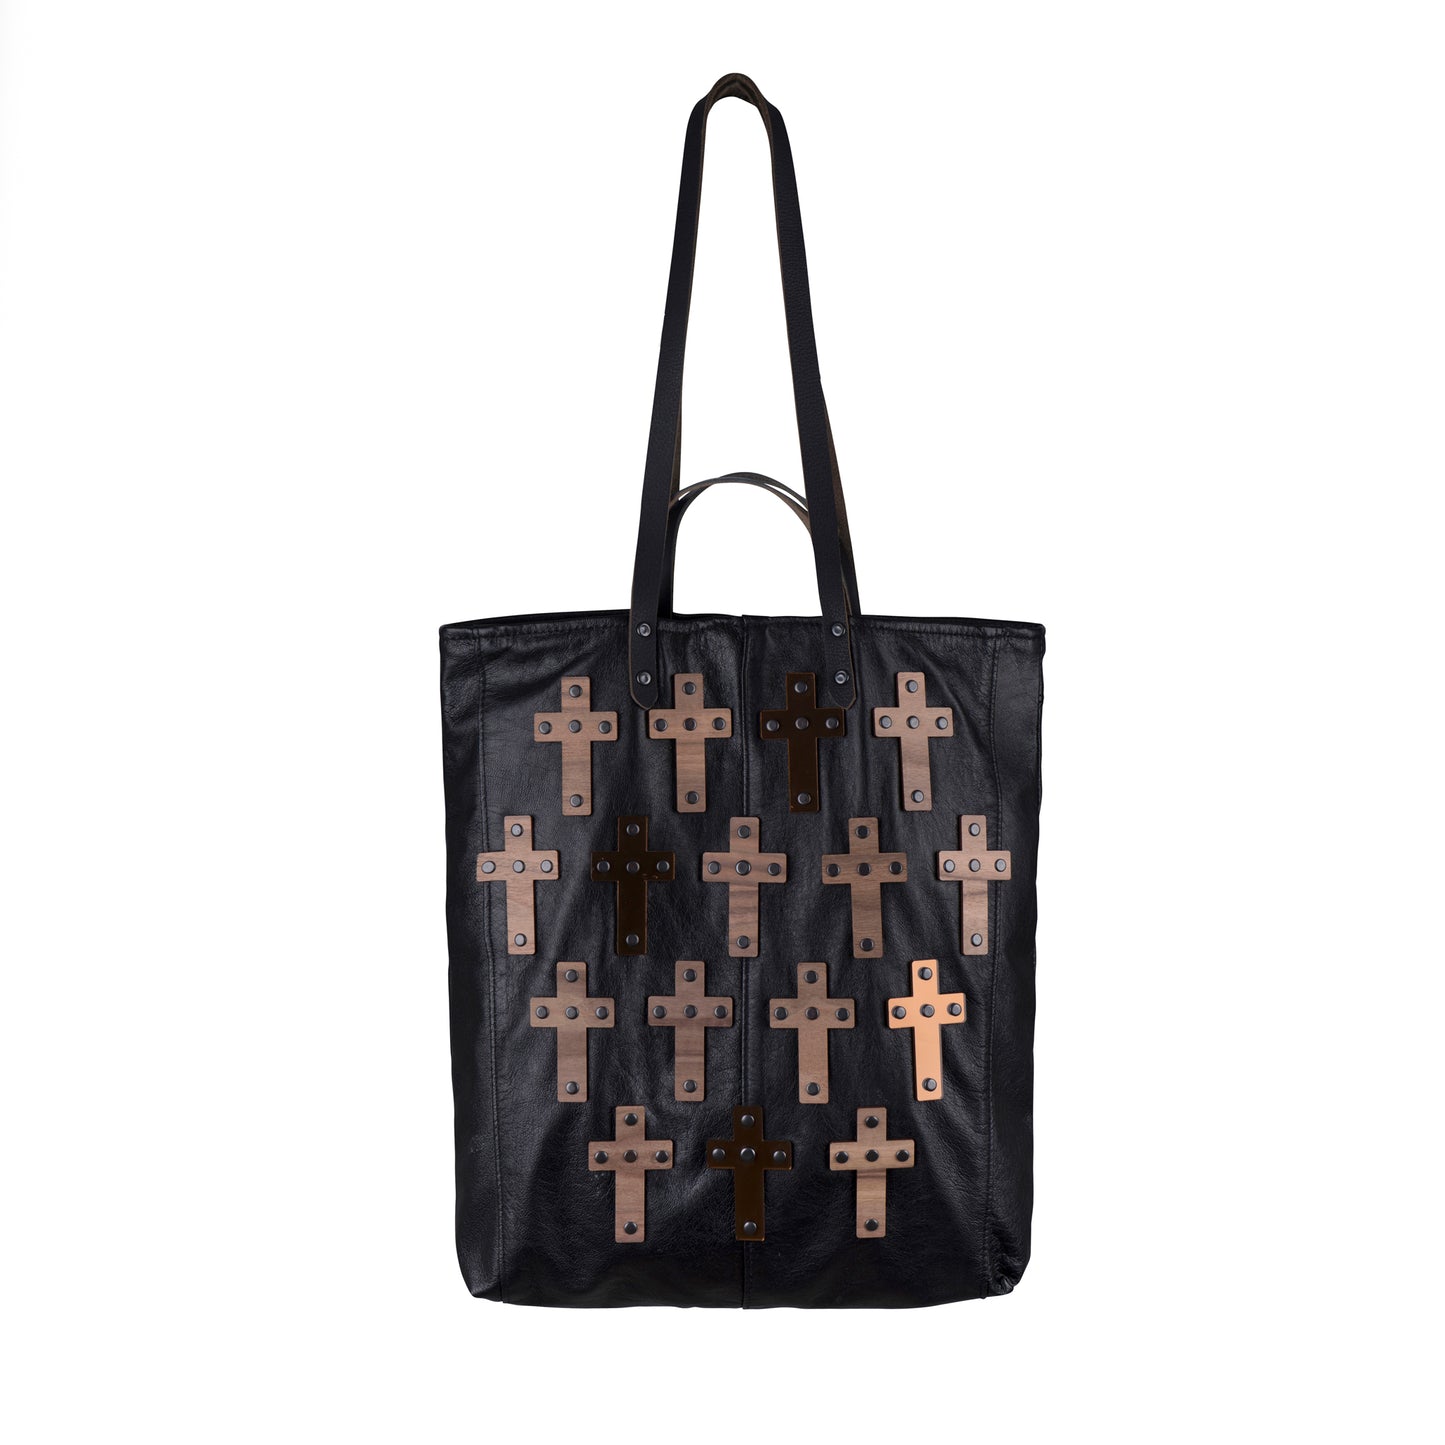 METANoIA The Cross Black recycled leather tote handbag with cross shaped bamboo, walnut and metallic acrylic forms.